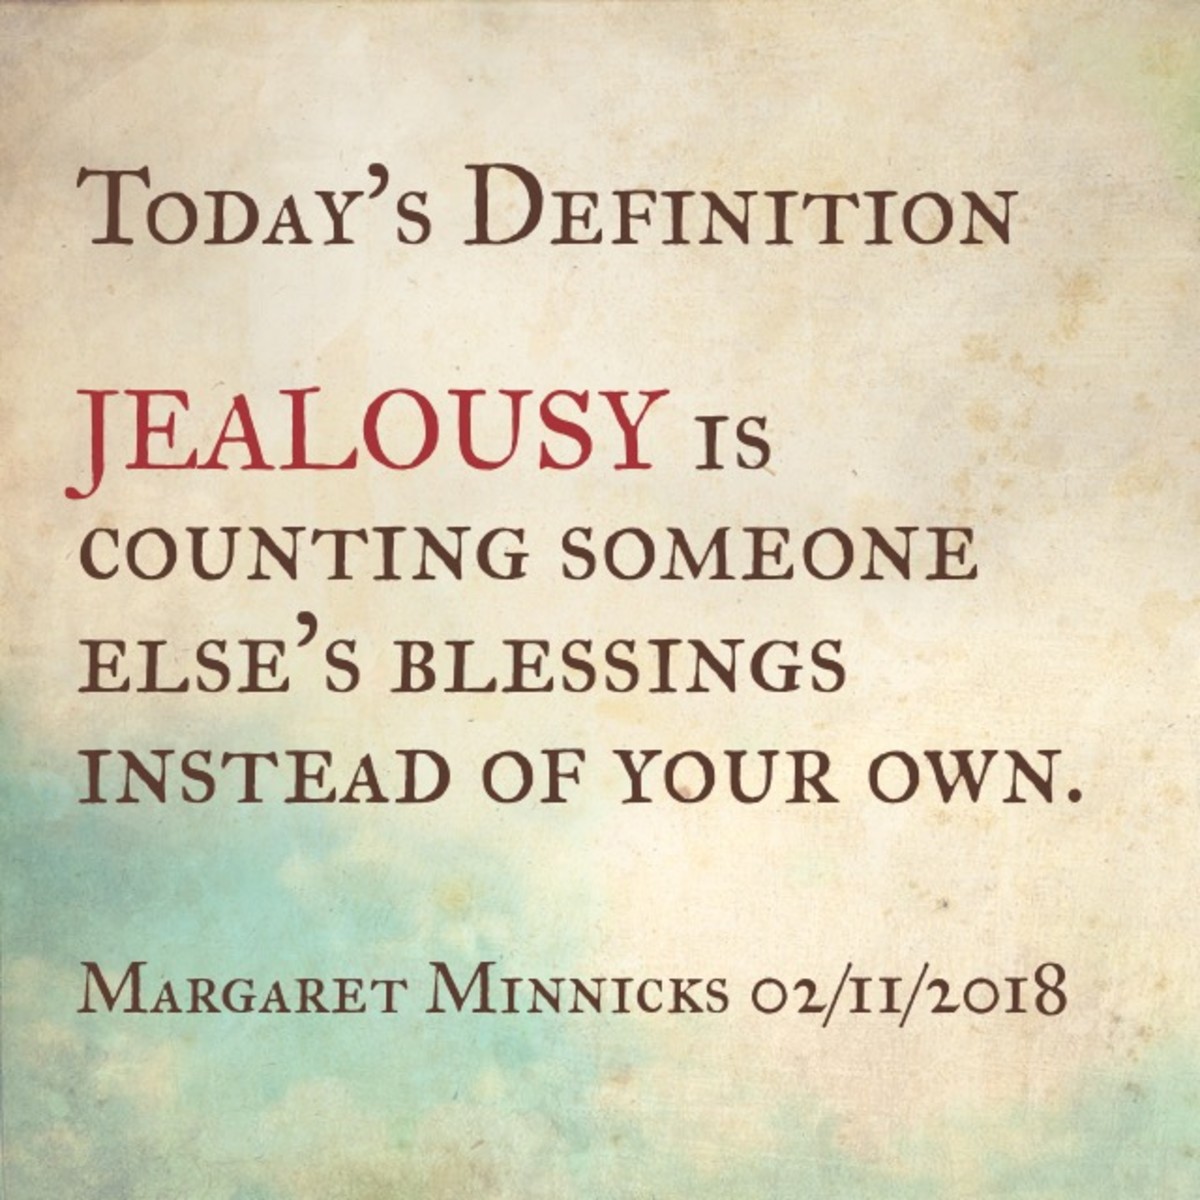 Jealousy is brought on by feeling resentment against someone because of what another person's success, advantage, etc.